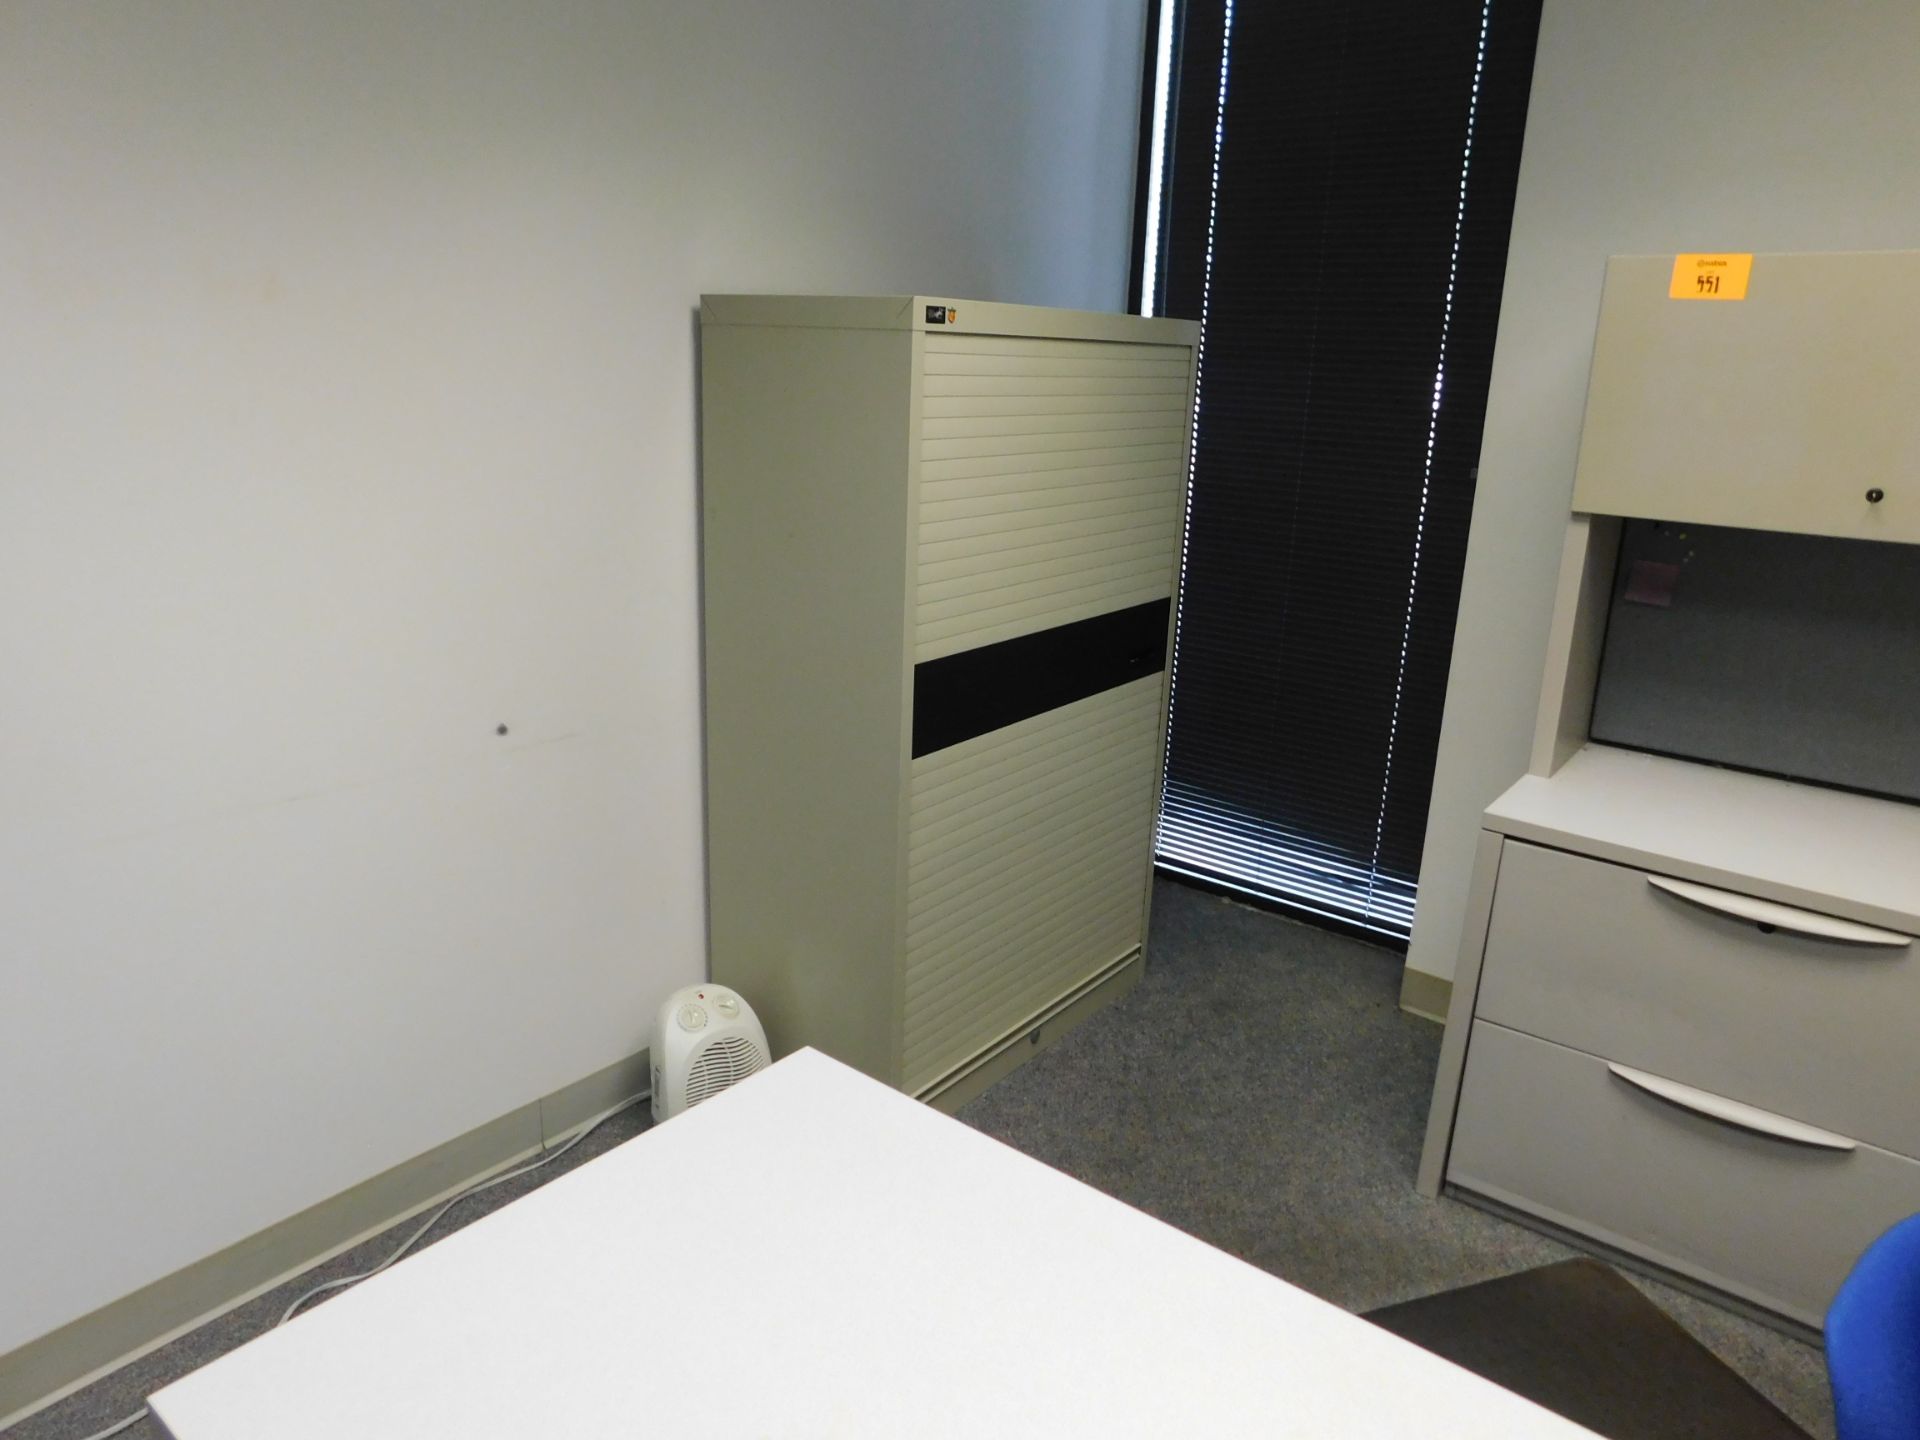 Office Furniture - Image 2 of 4